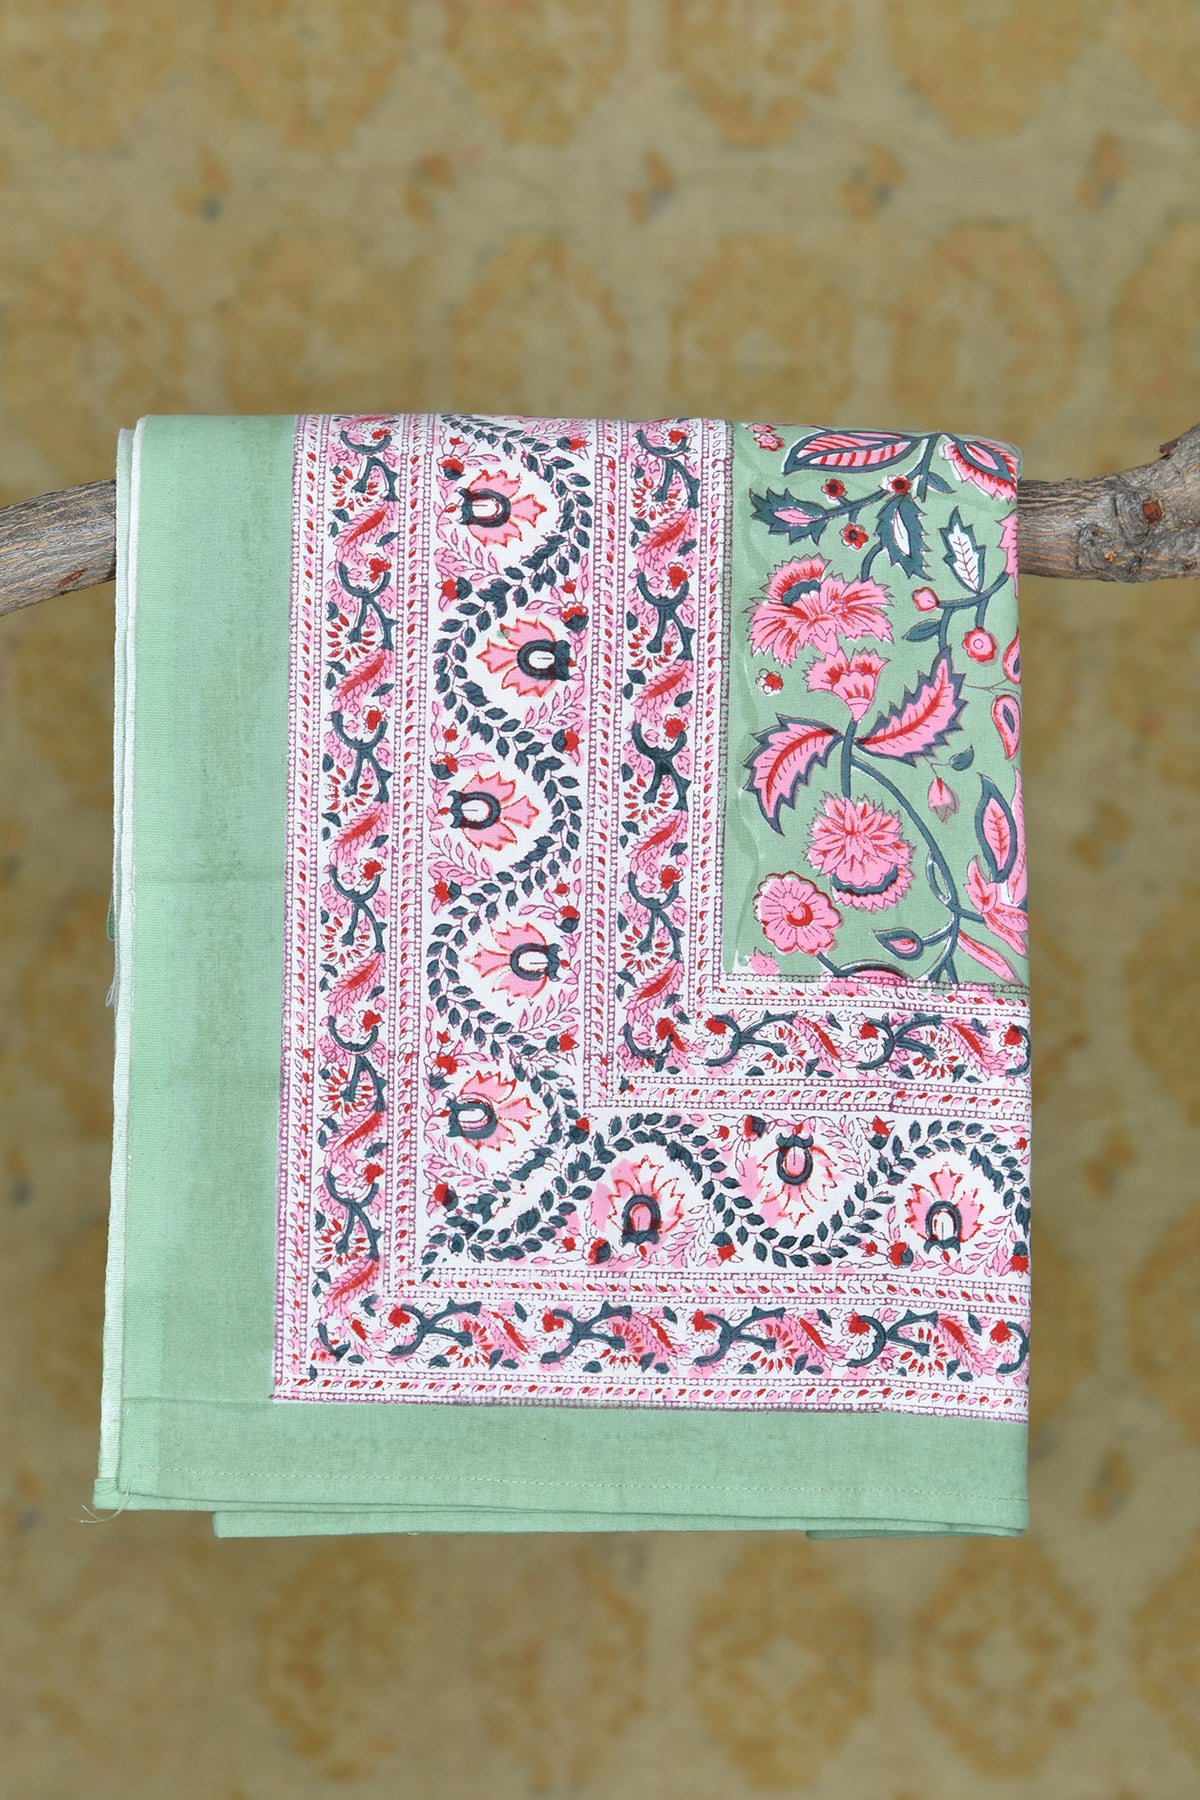 Mint Green With Pastel Pink And Red Persian Floral Printed Pure Cotton Single Bedspread